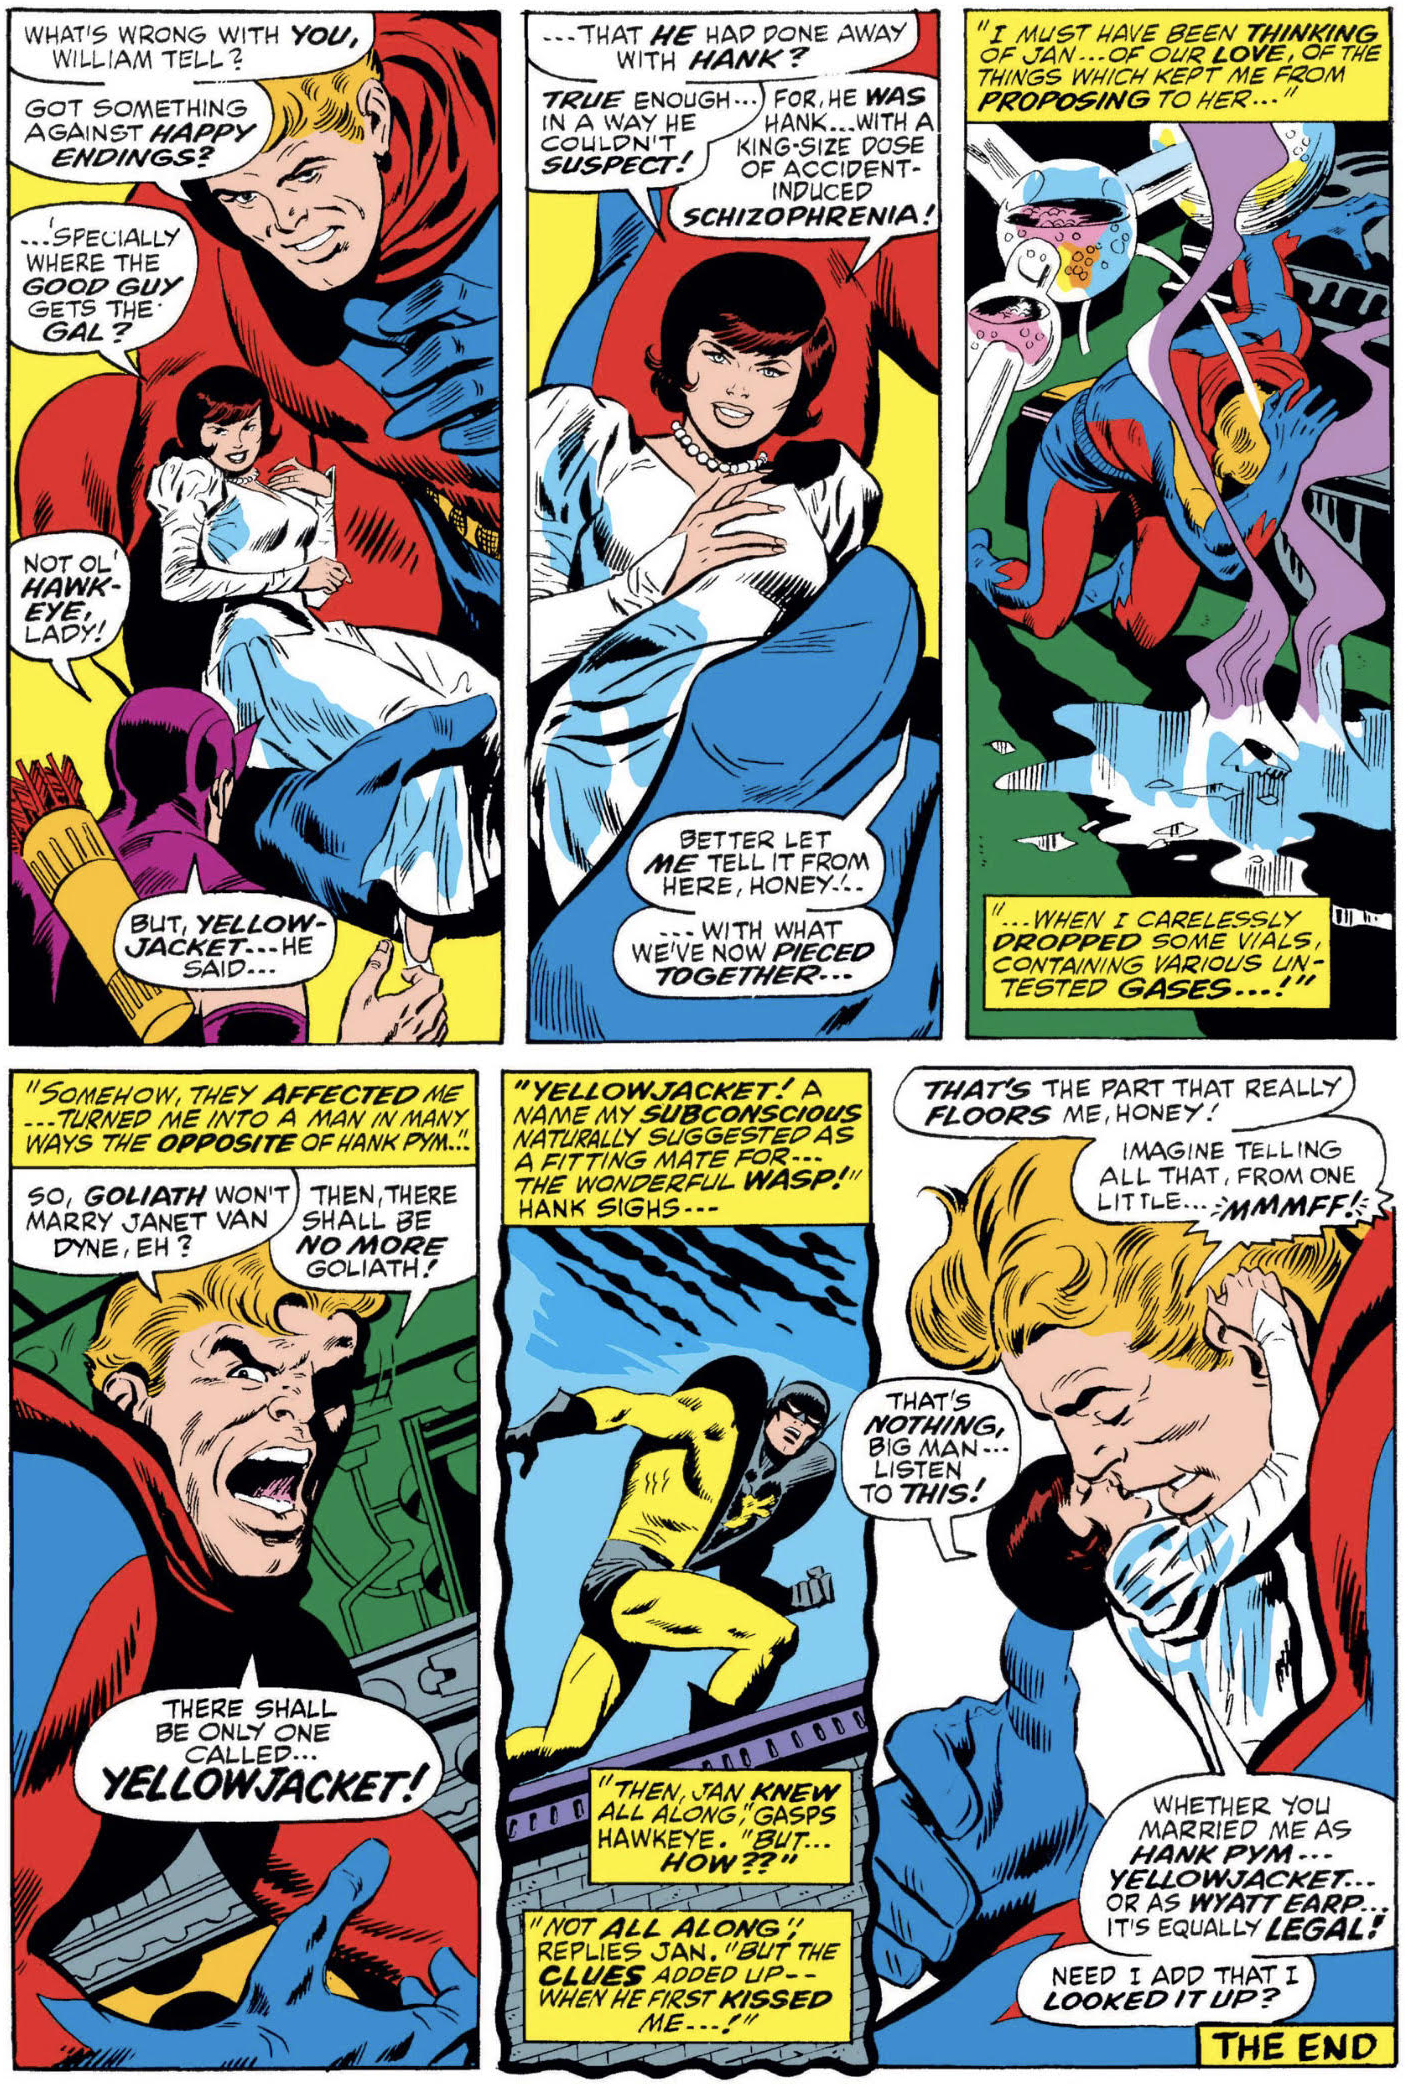 Hank and Janet reveal the truth of Yellowjacket, in Avengers #60.